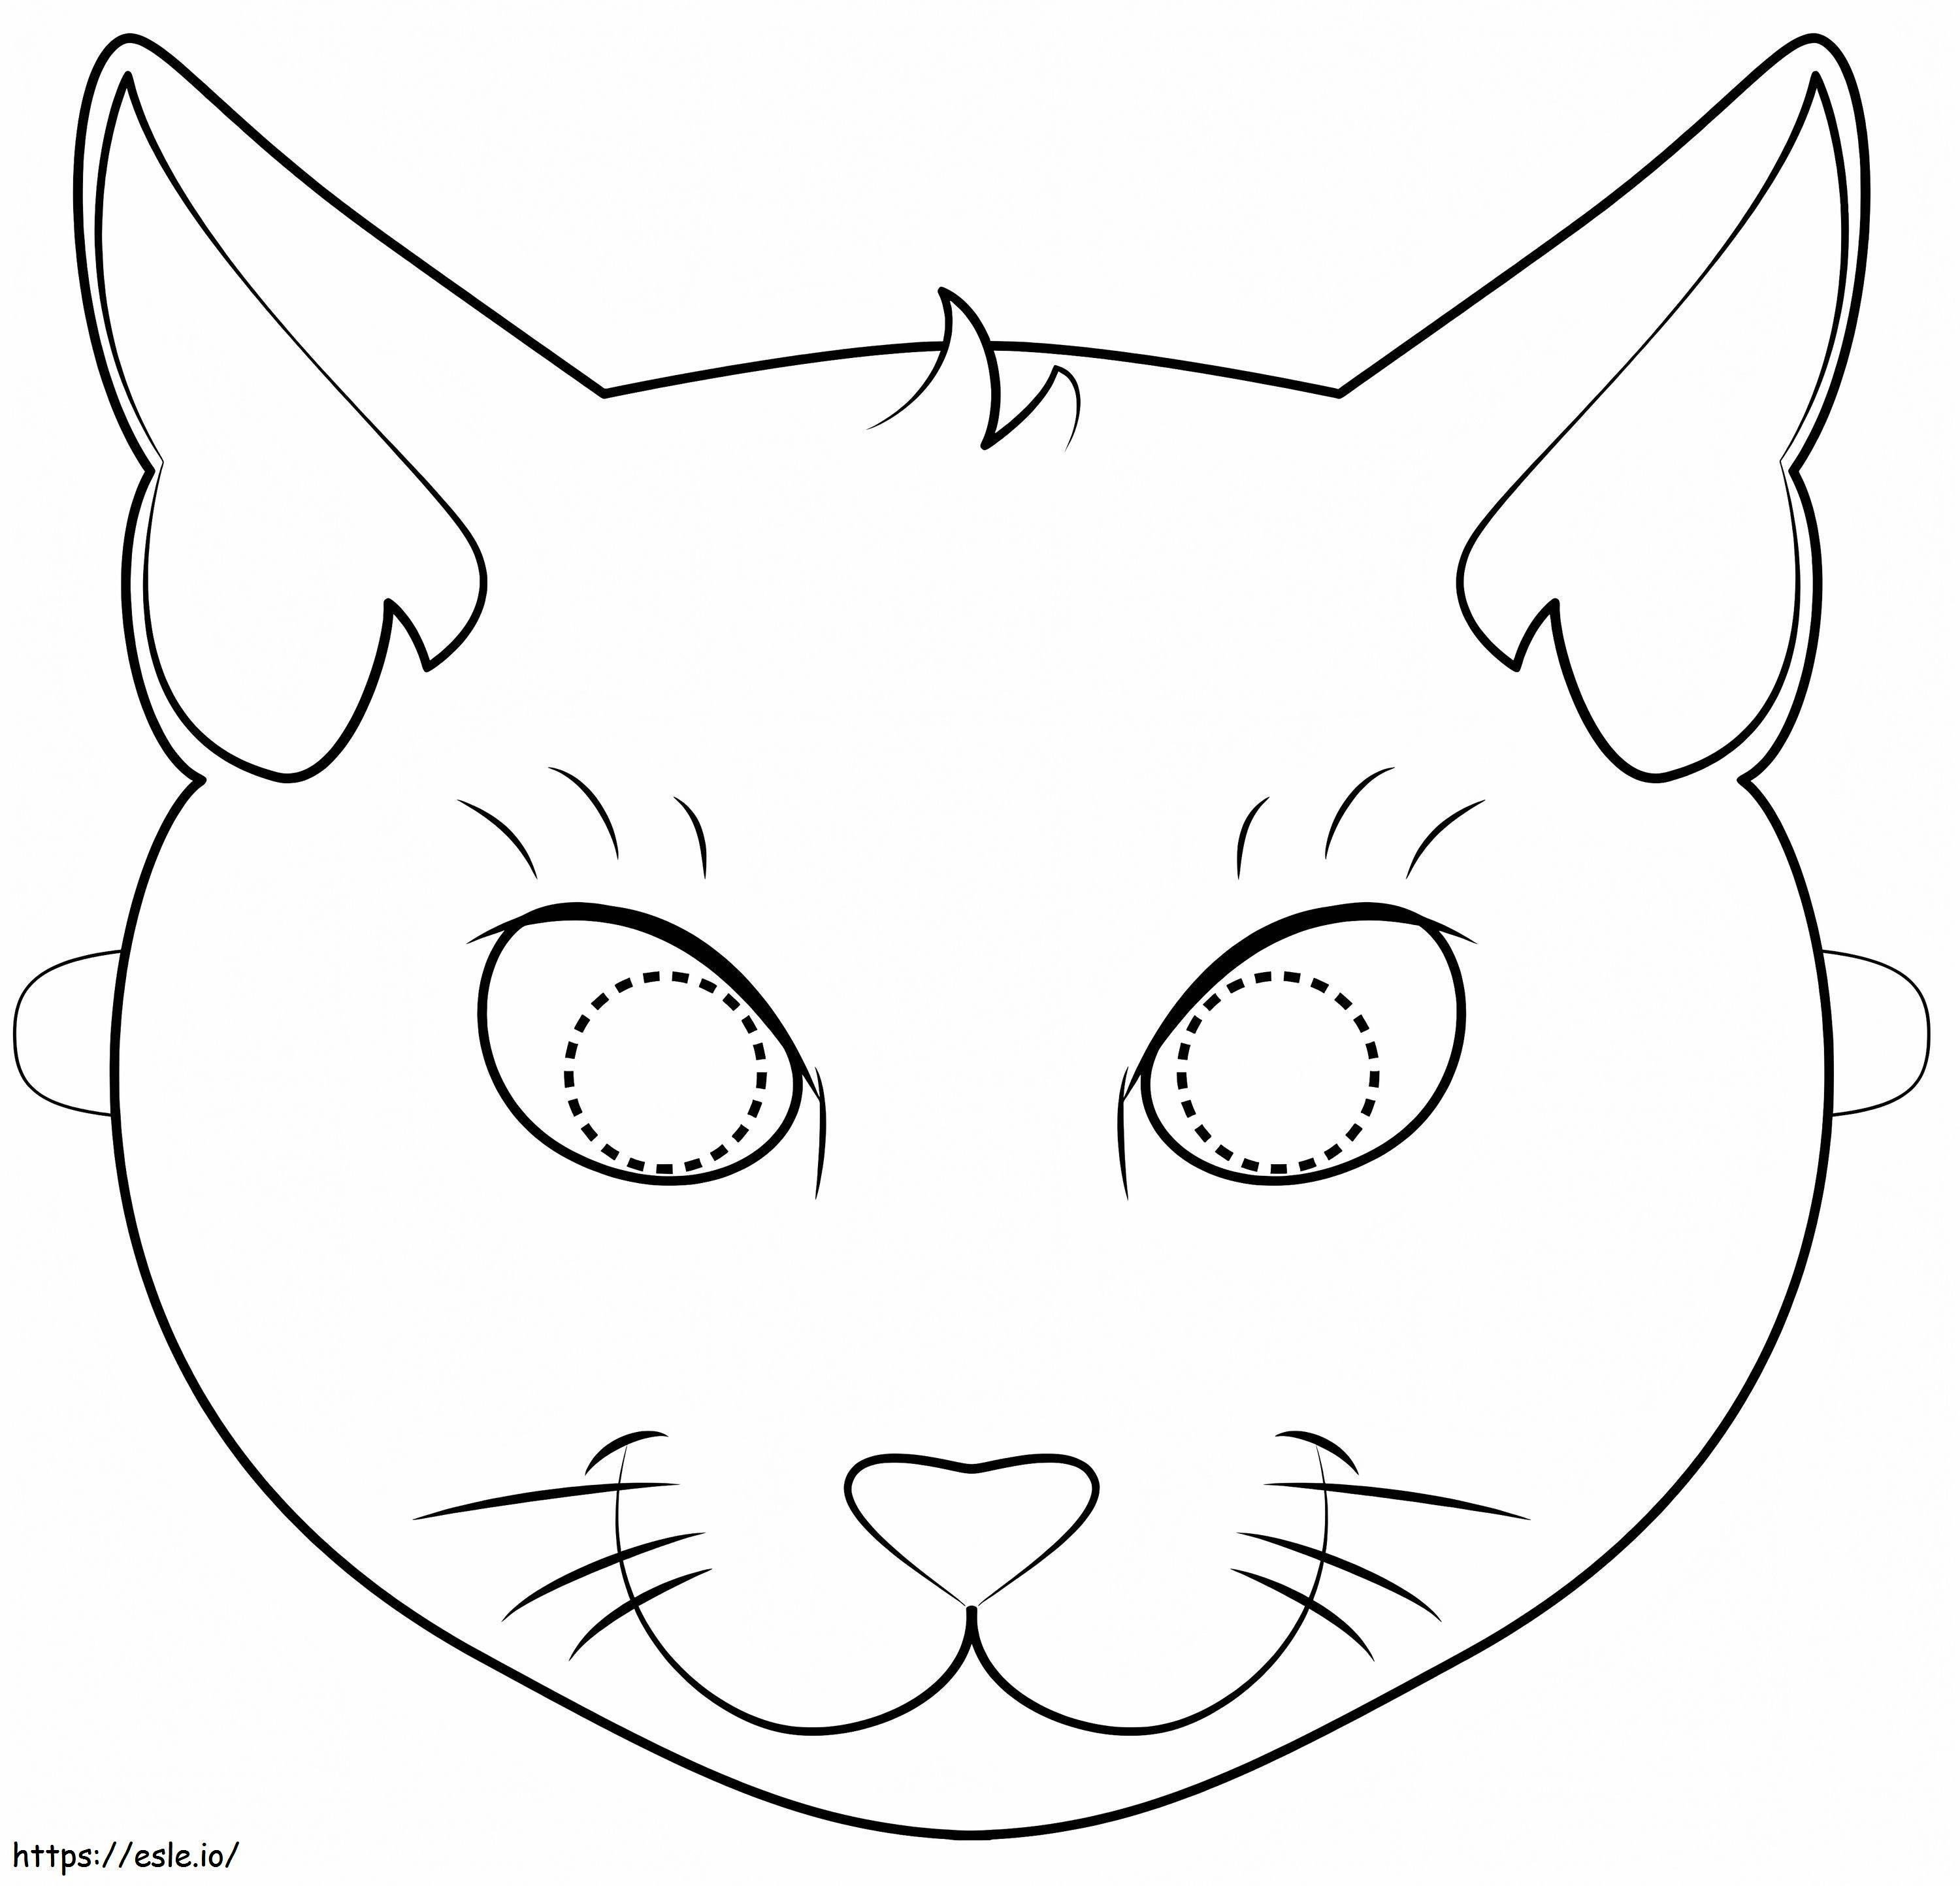 Halloween Black Cat Mask coloring page